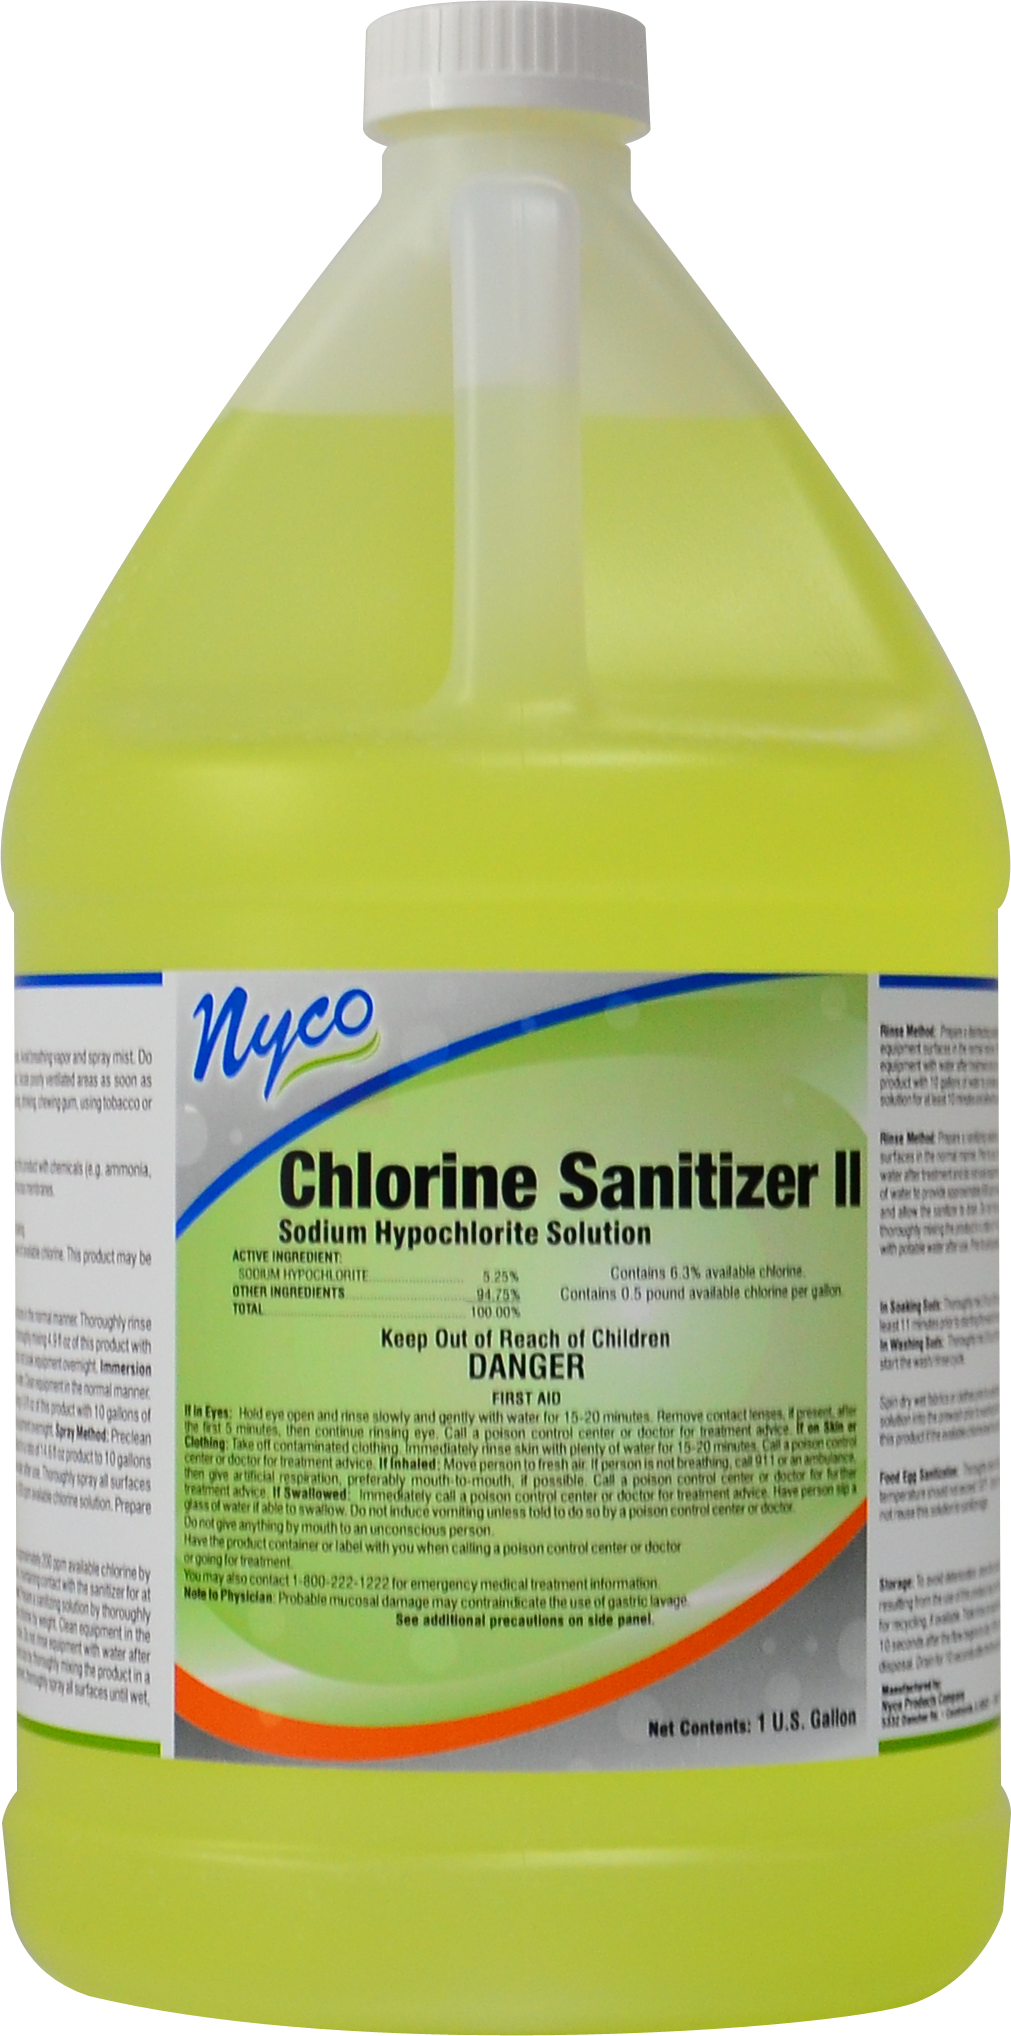 Why is Chlorine a Good Disinfectant?